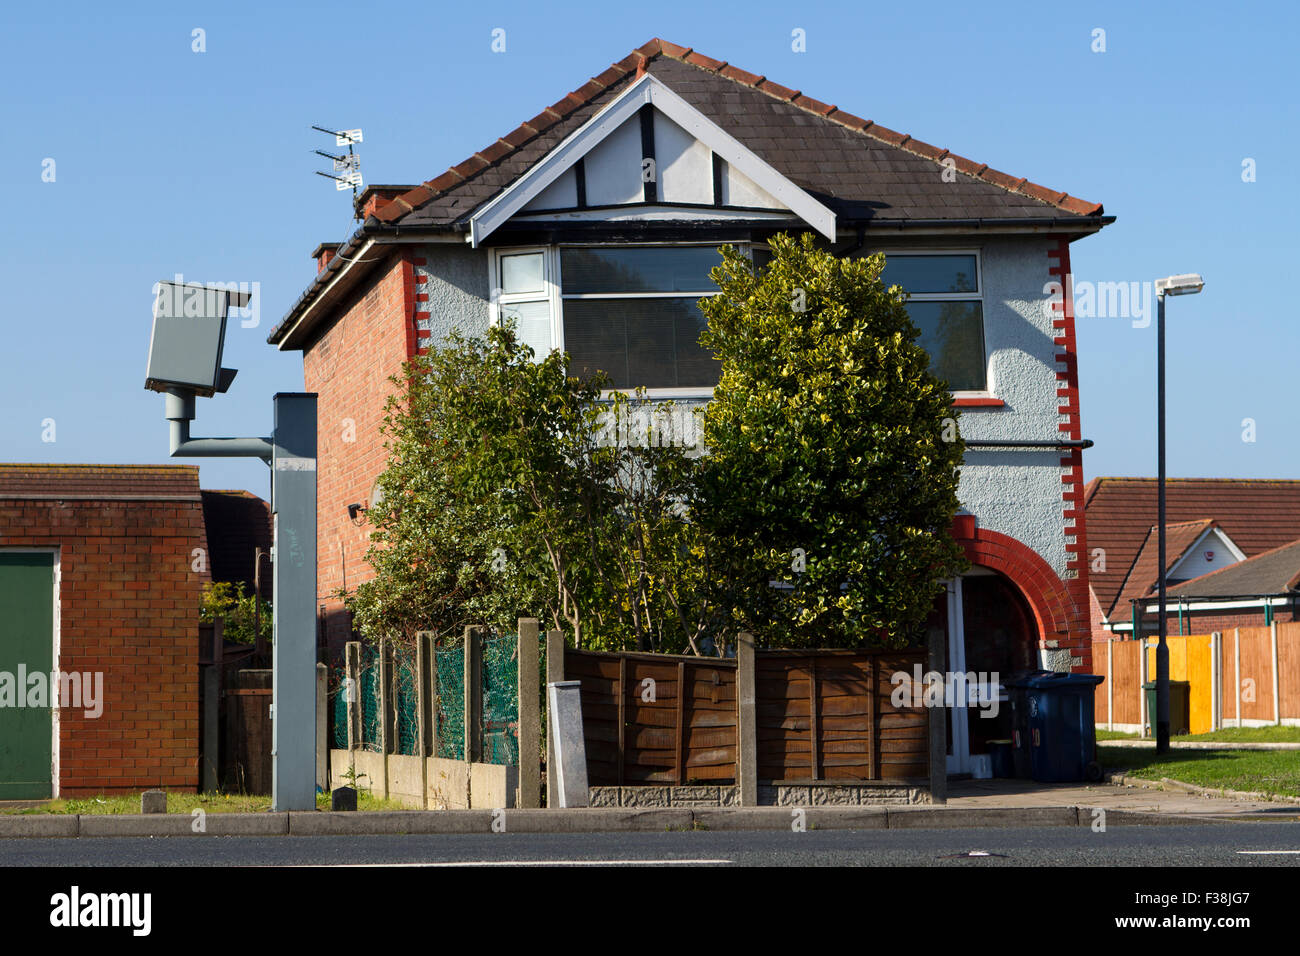 subsidence-damaged-detached-house-with-lean-in-kew-southport-merseyside-F38JG7.jpg